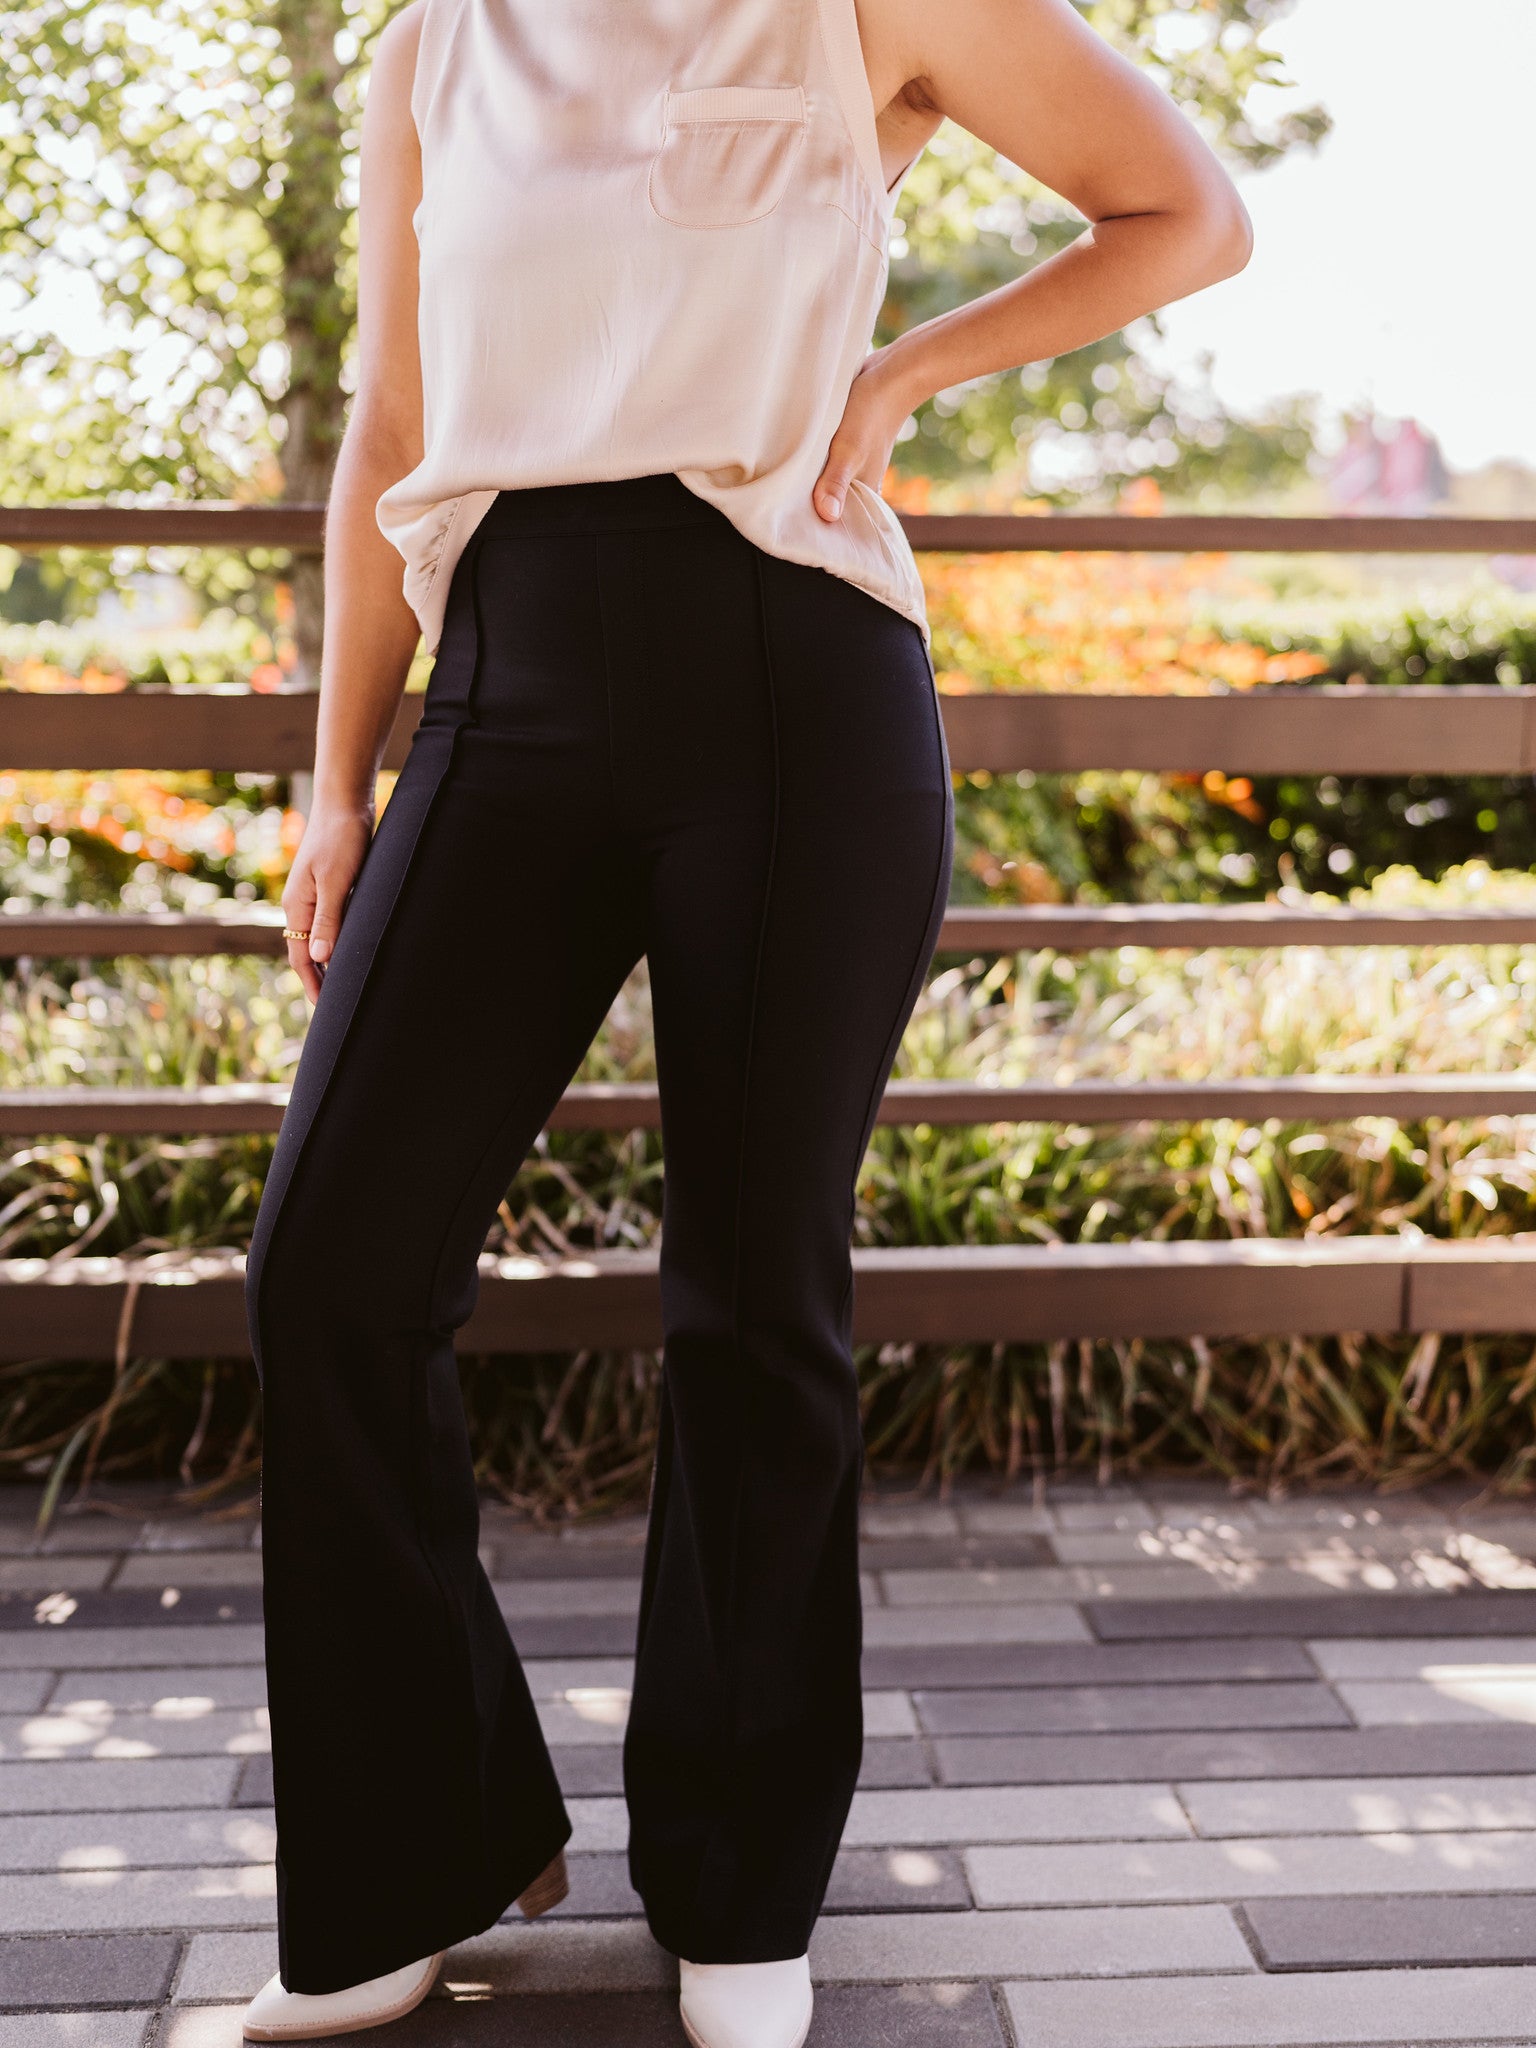 SPANX - Look up Perfect Black Pants, Hi-Rise Flare and you'll get LEGS  FOR DAYS! Shop these styles now at